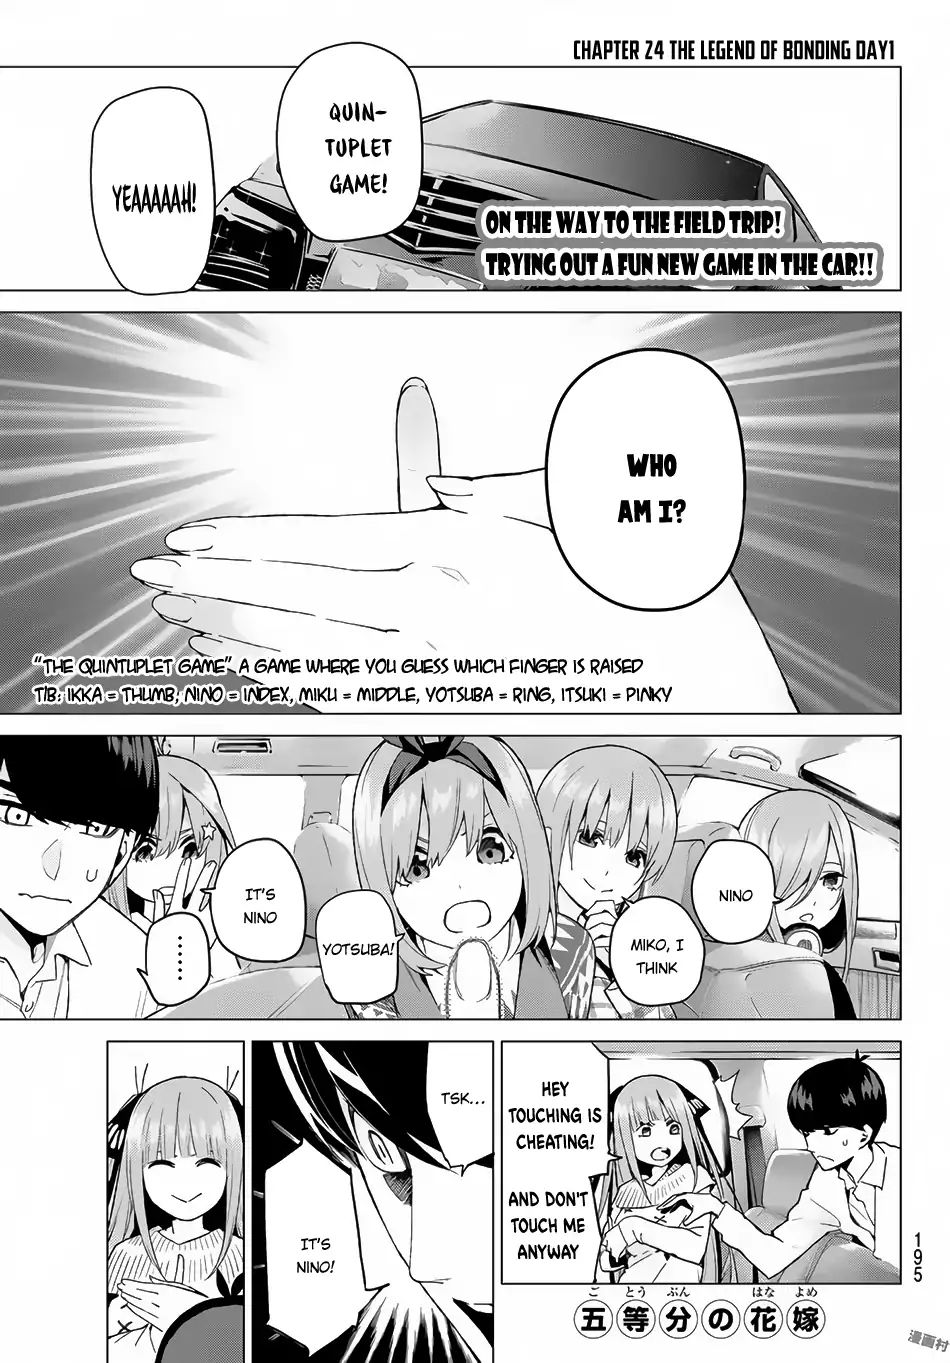 Go-Toubun No Hanayome Vol.3 Chapter 24: The Legend That Binds - Day One - Picture 2